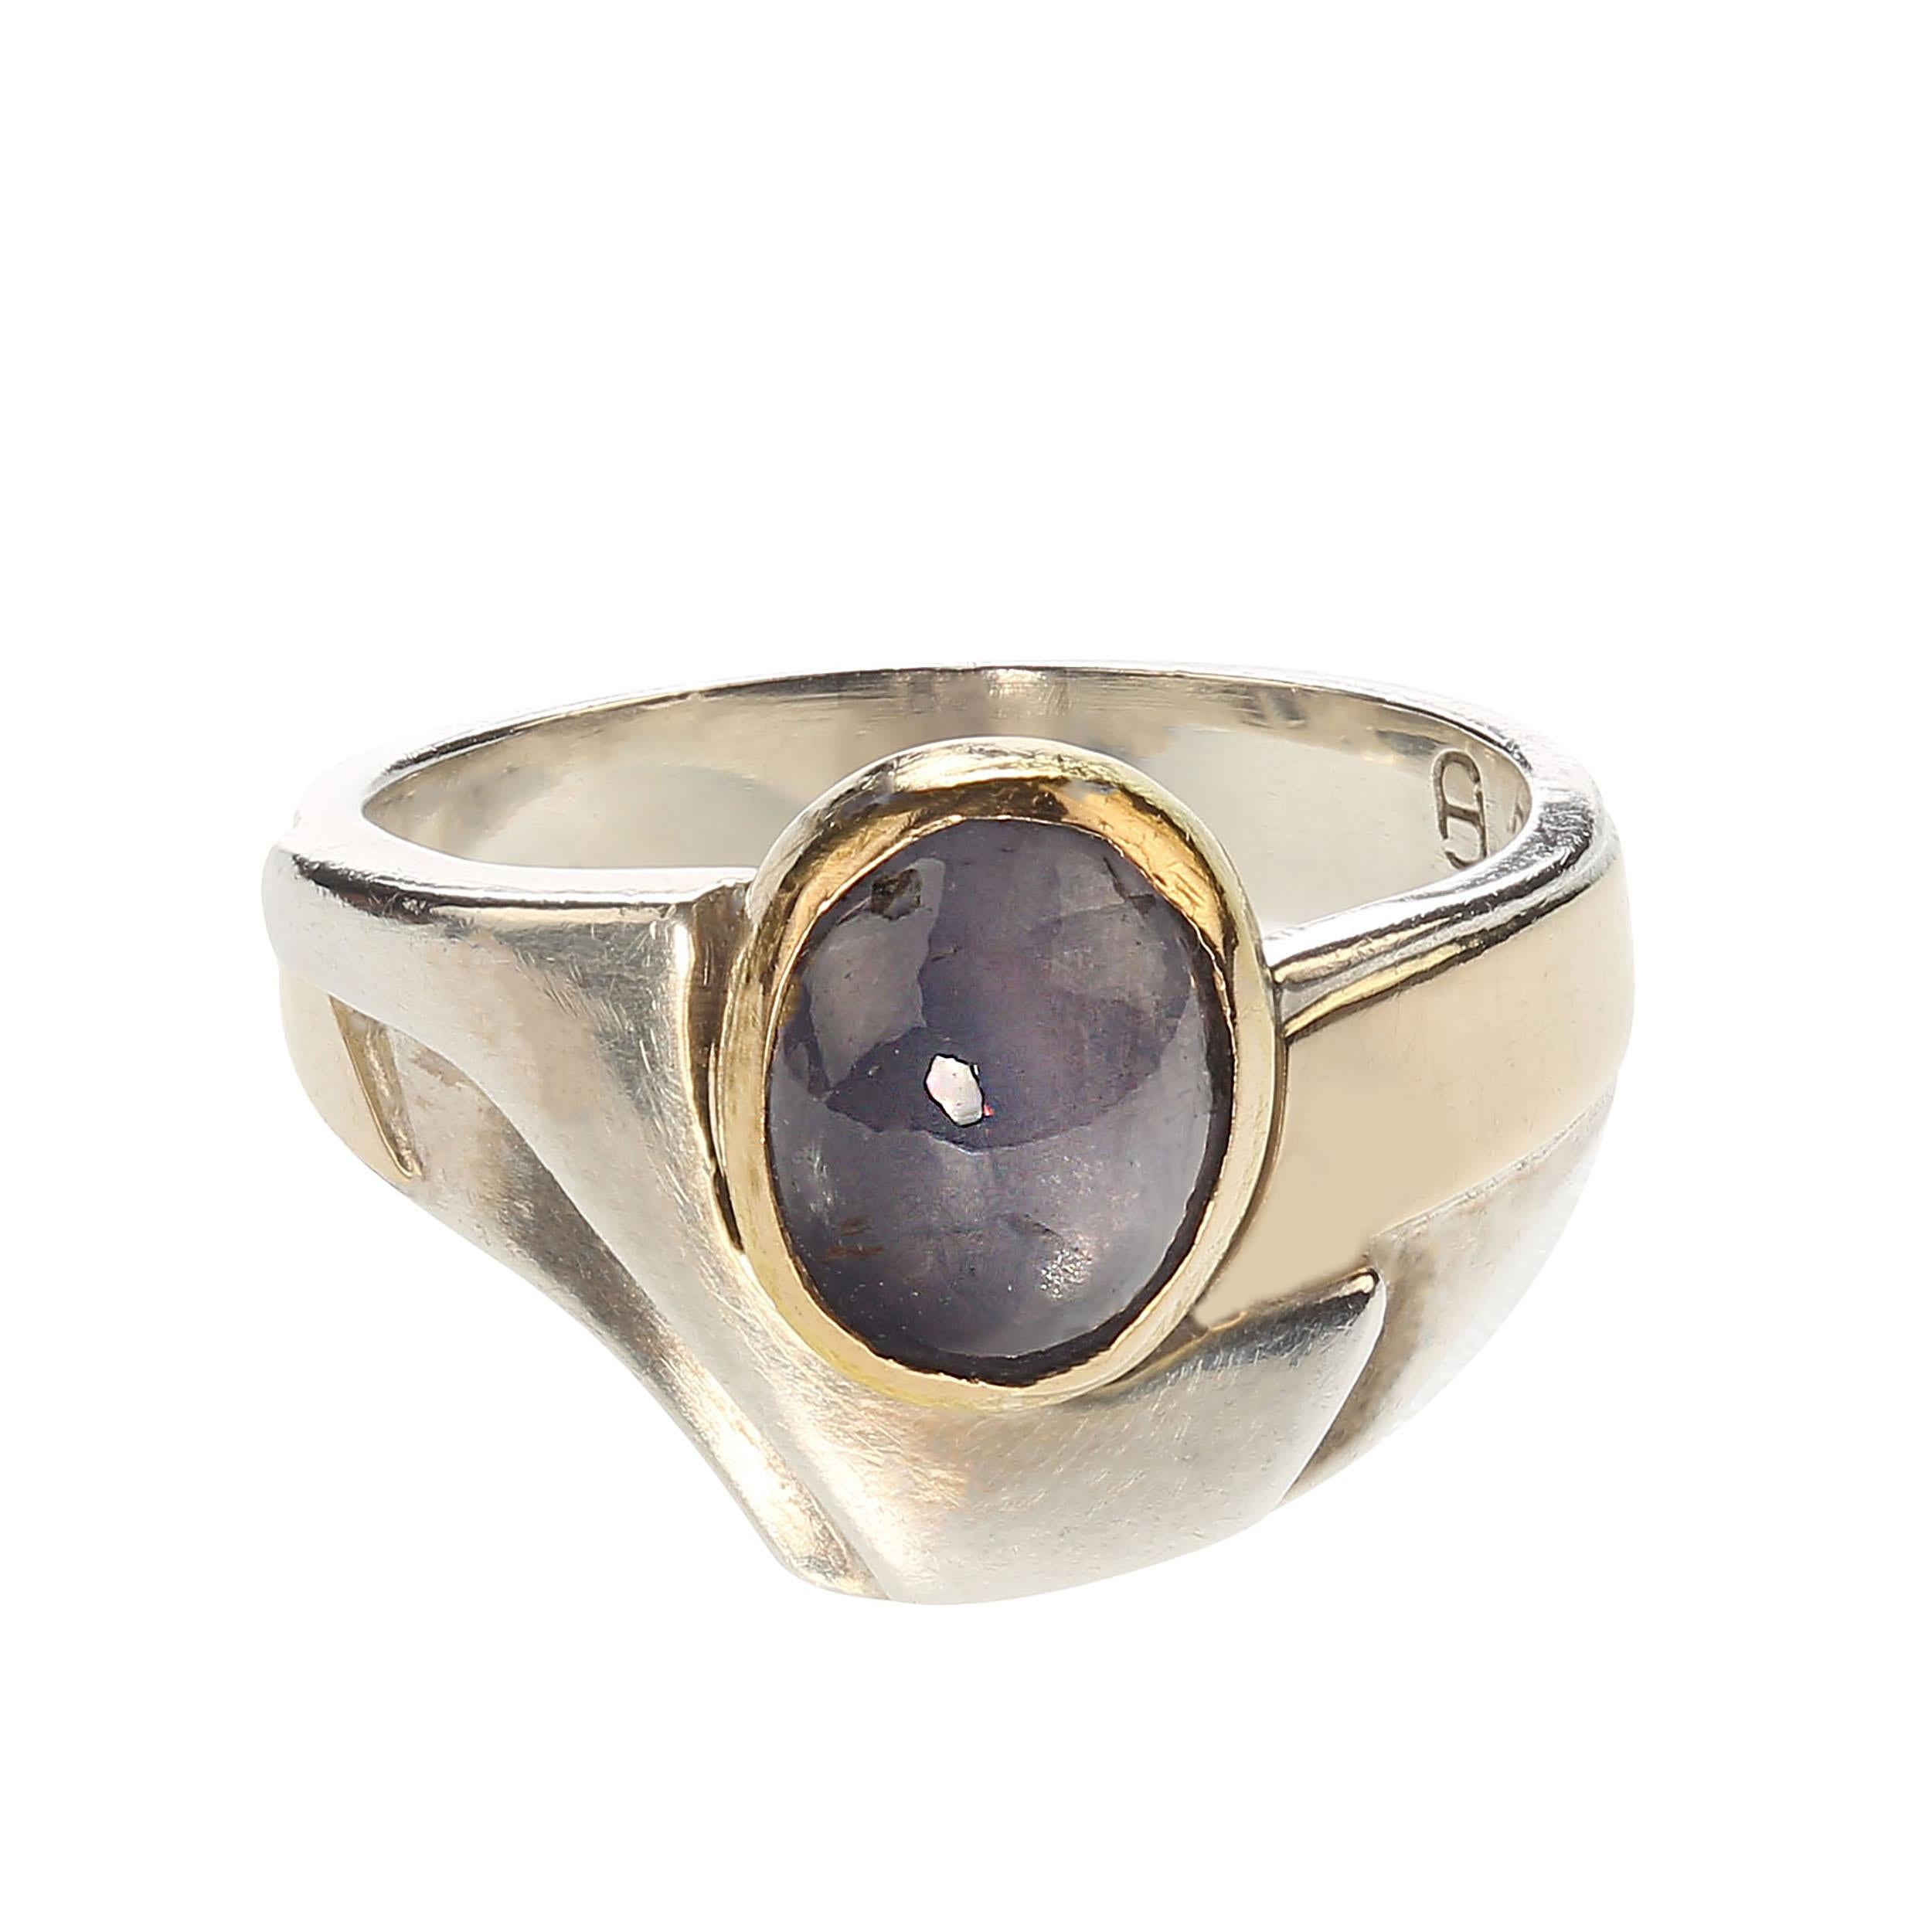 Cabochon AJD Blue Star Sapphire Sterling and 18K Gold Handmade Ring